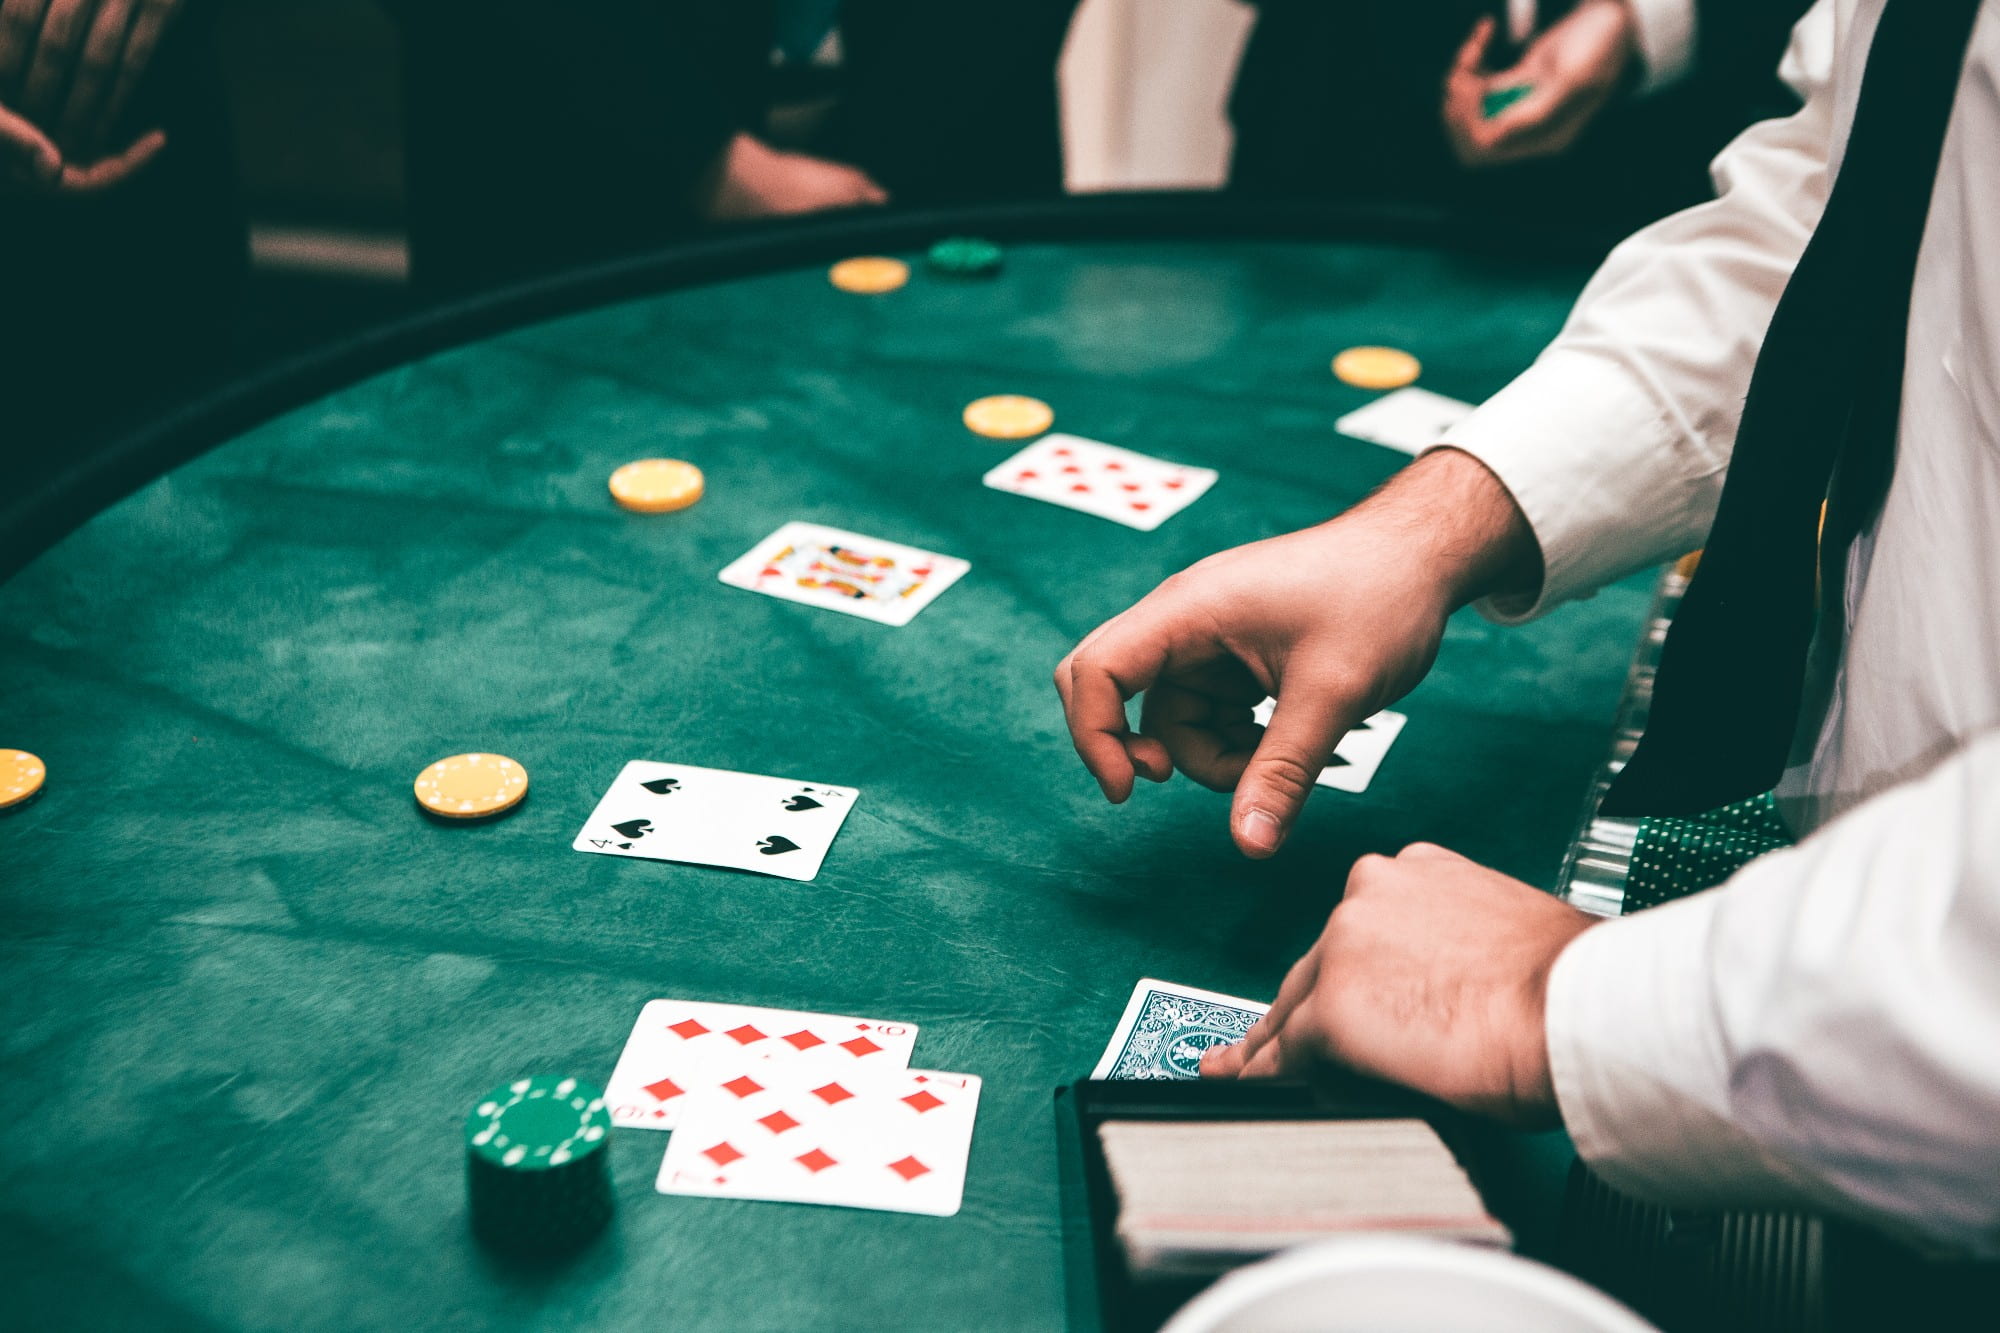 7 Tips to Help You Cope With Gambling Withdrawal